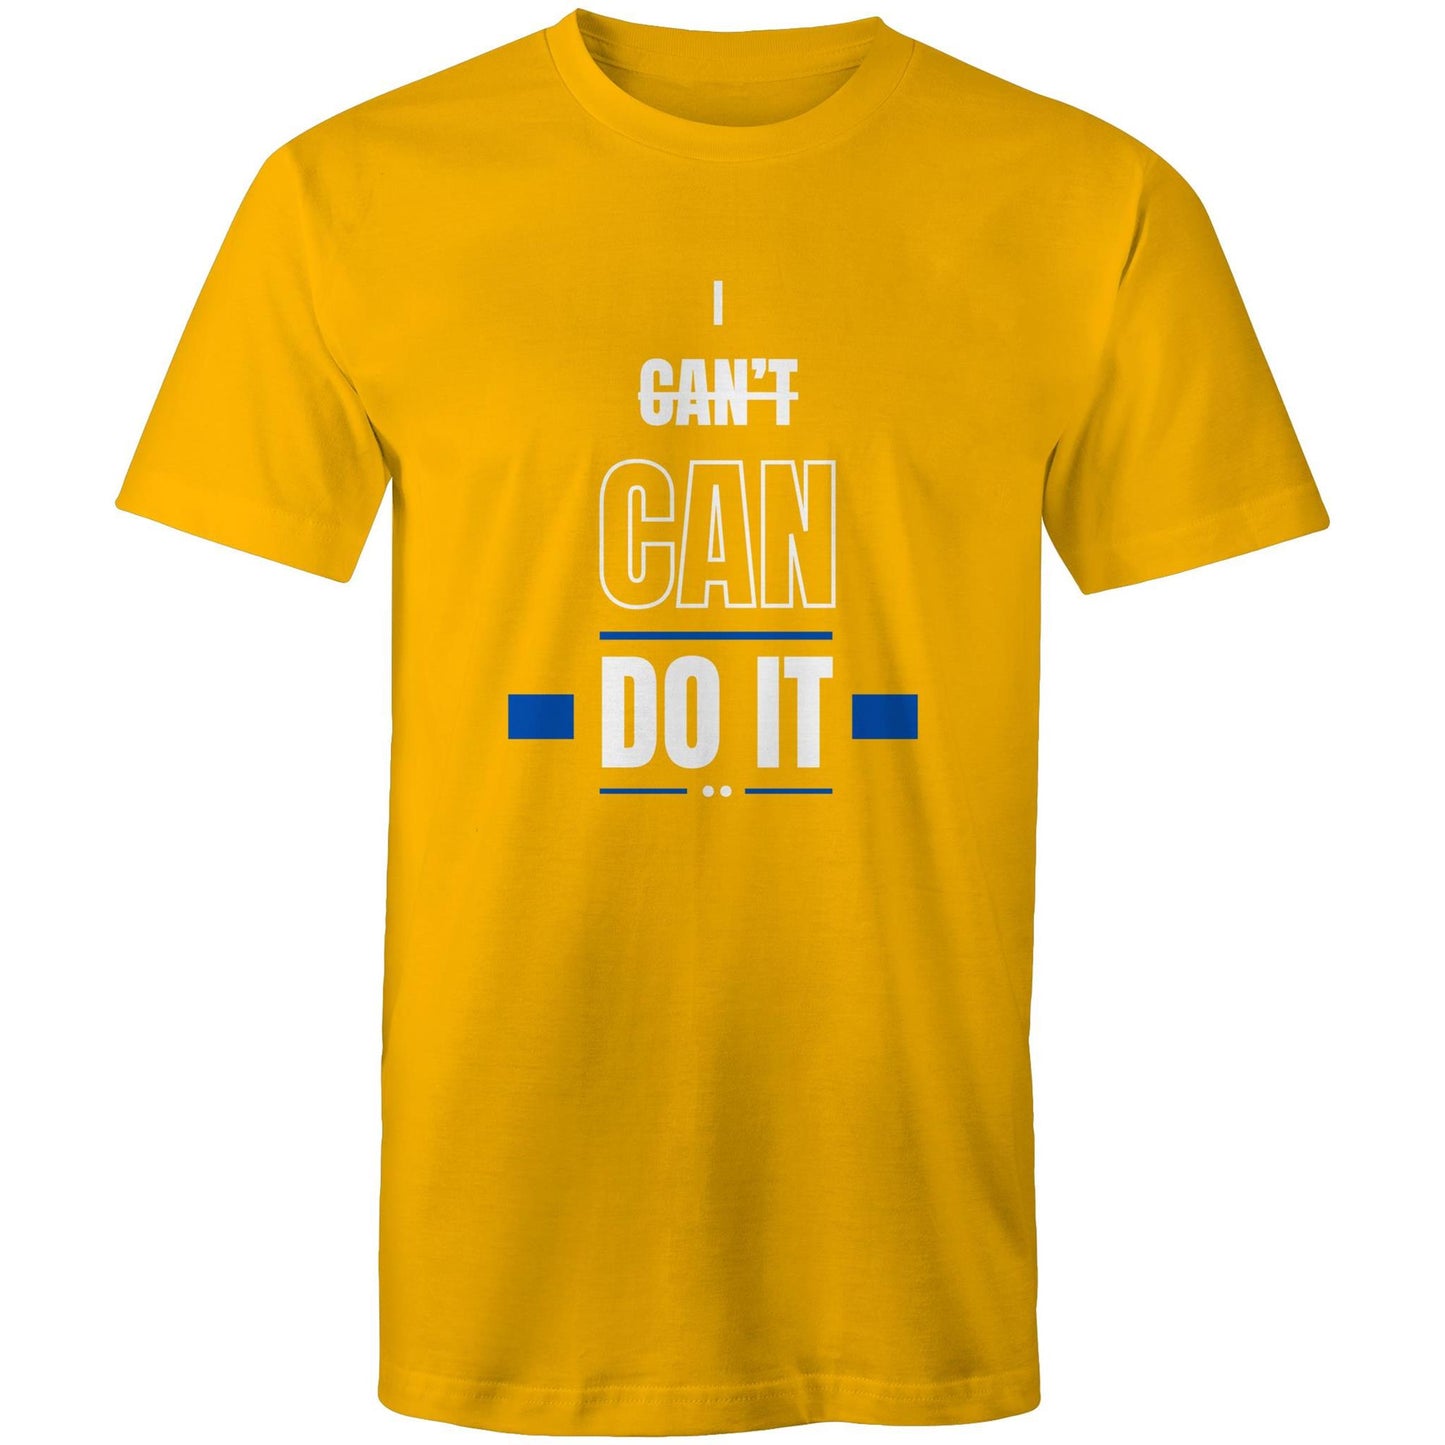 I CAN'T CAN DO IT - Mens T-Shirt